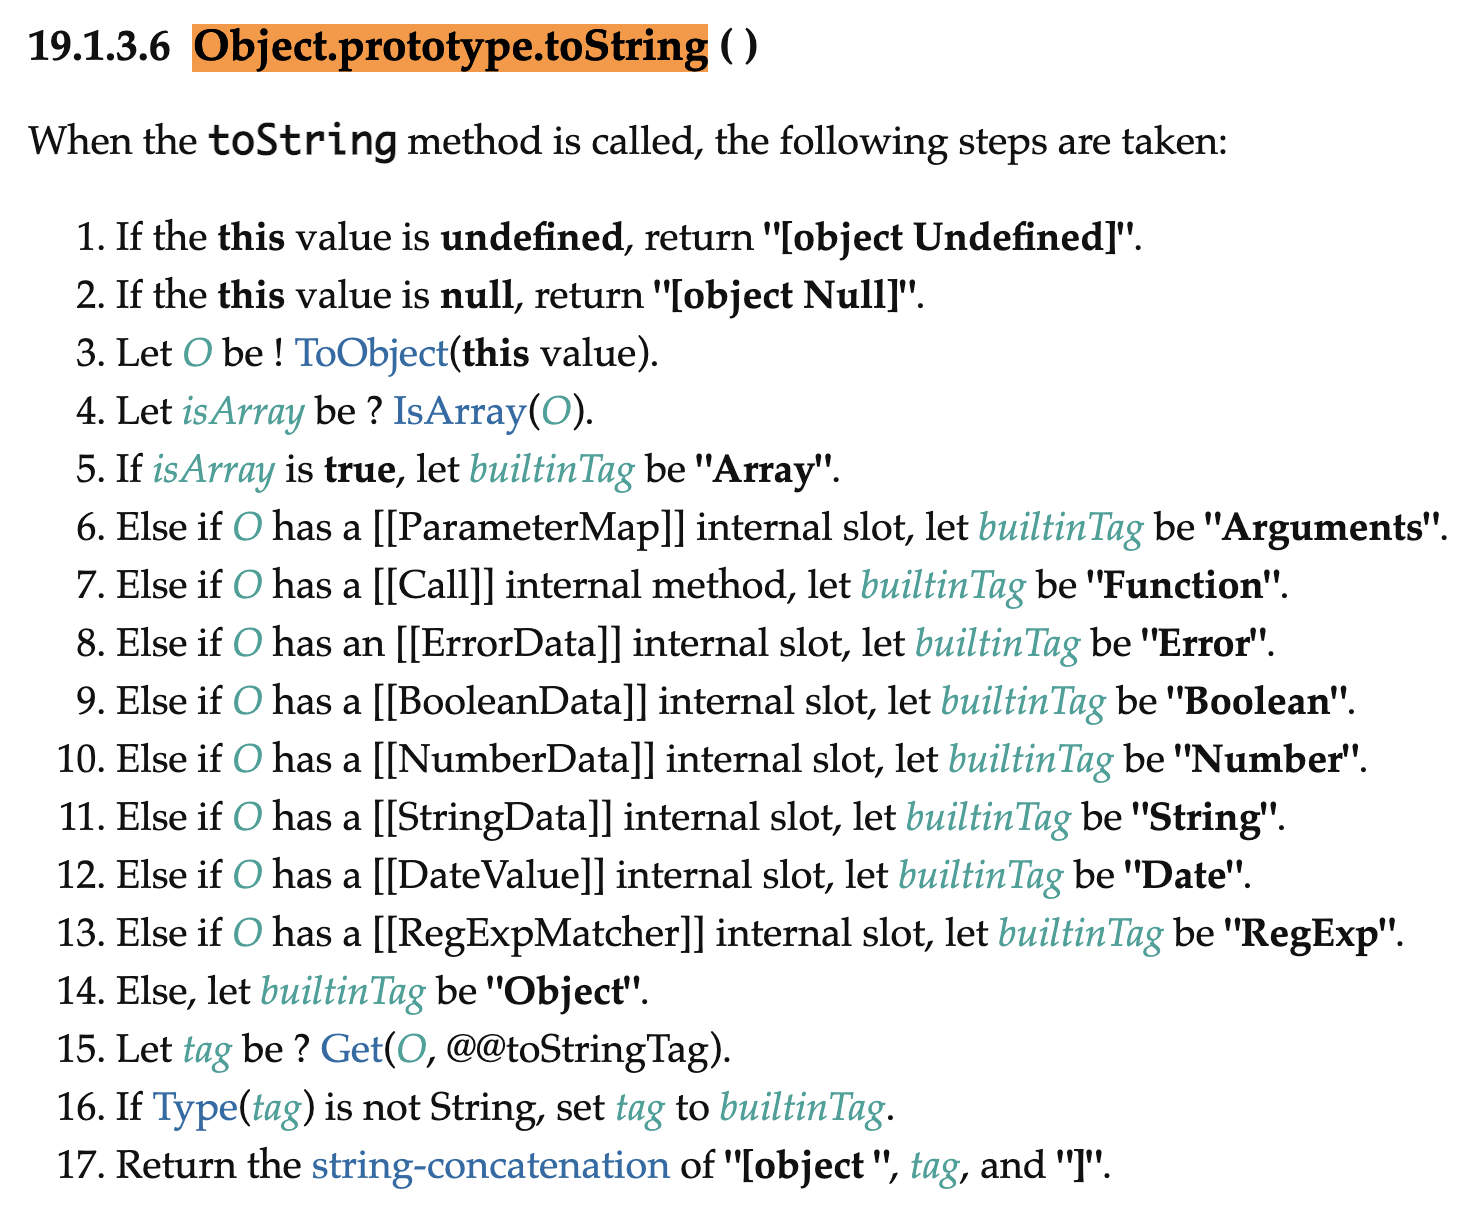 Object.prototype.toString